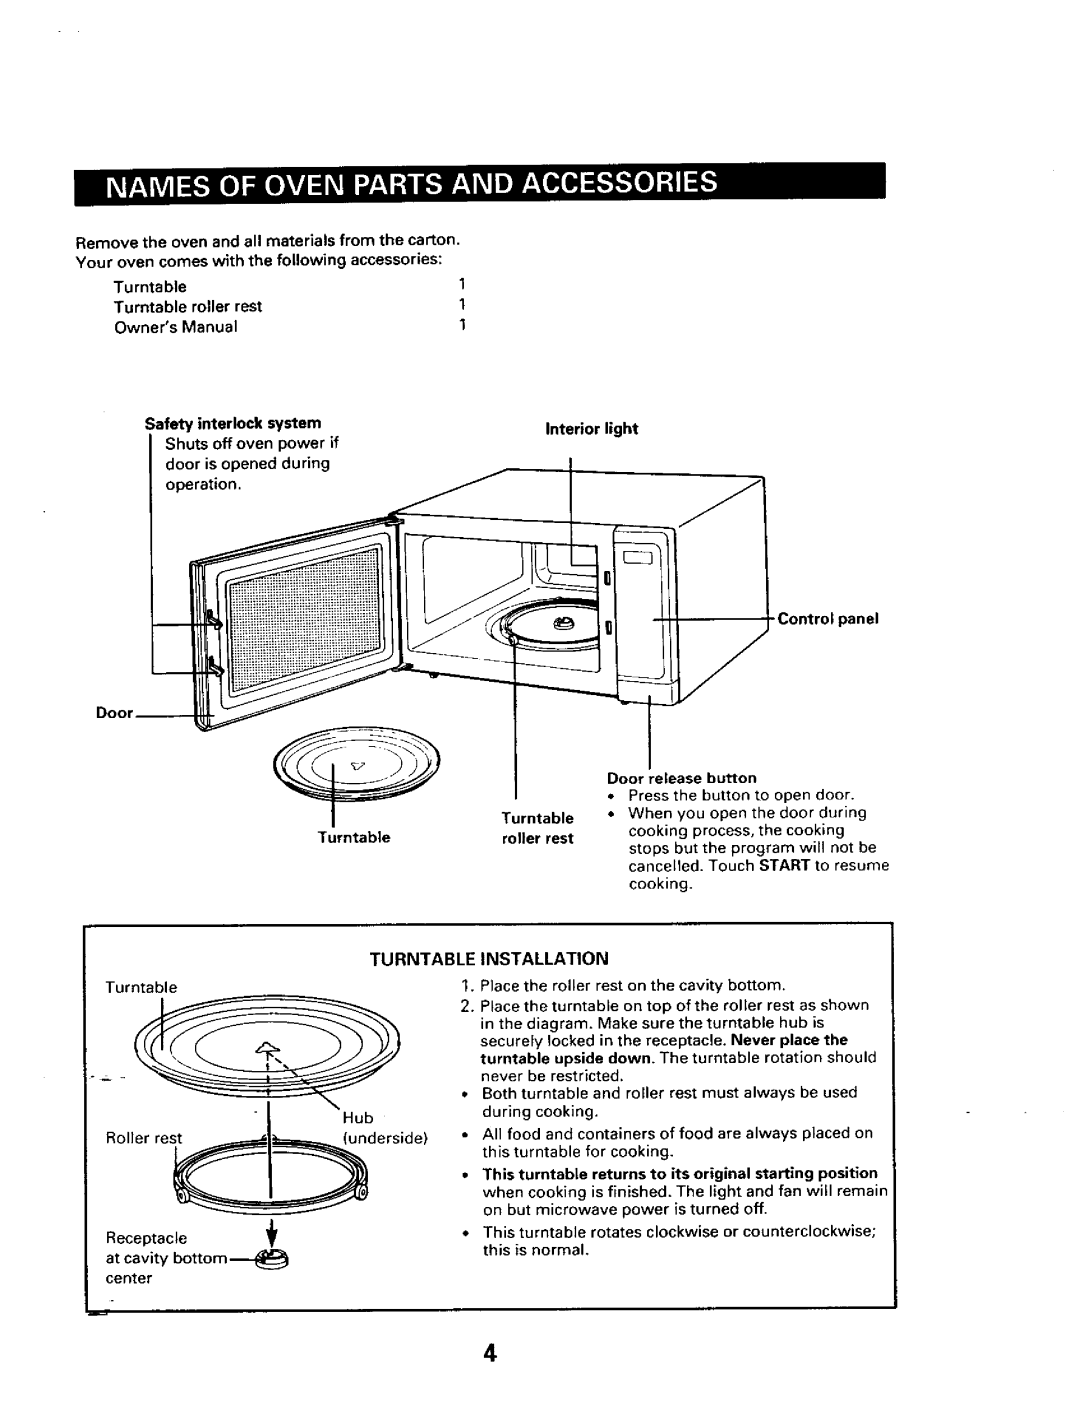 Sears 565.66101 owner manual Turntable Installation 